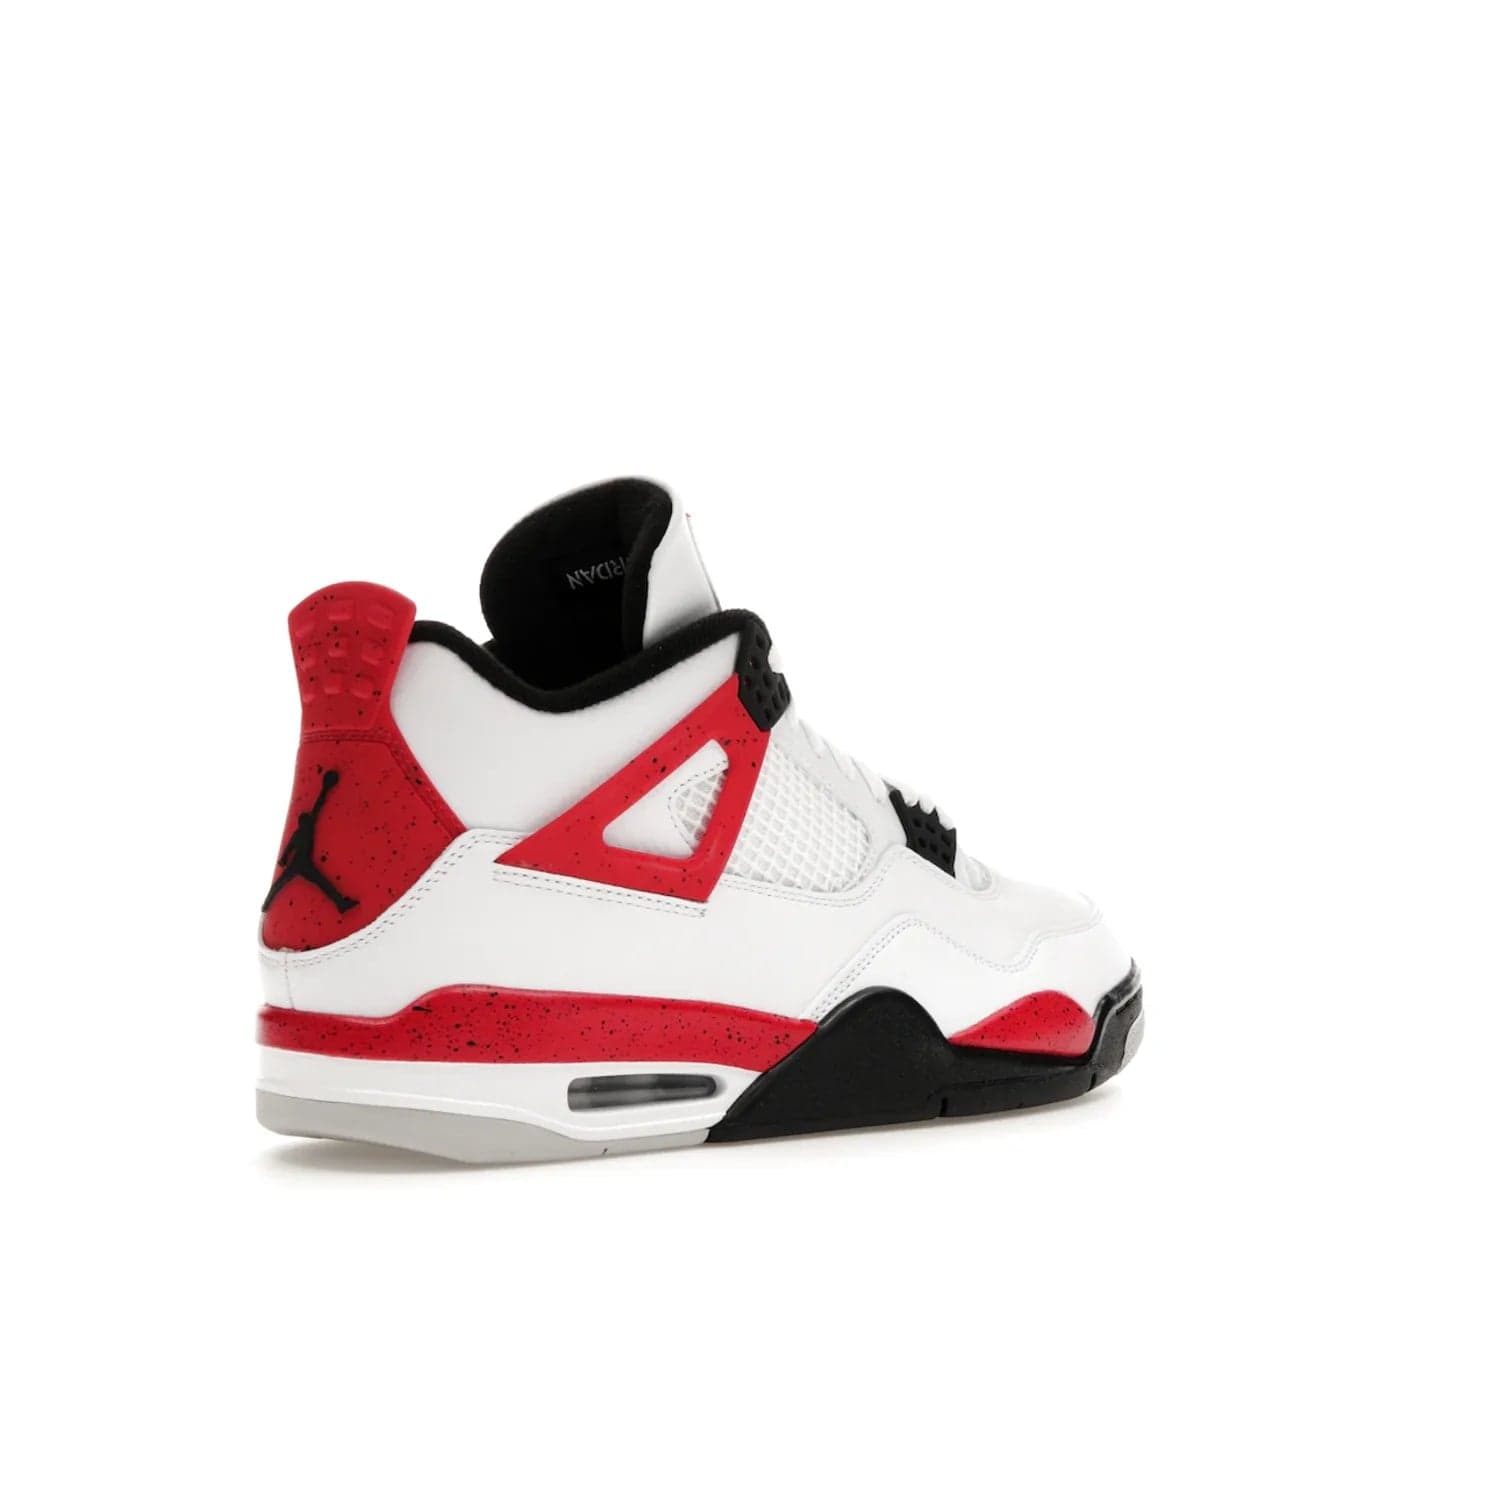 Jordan 4 Retro Red Cement - Image 33 - Only at www.BallersClubKickz.com - Iconic Jordan silhouette with a unique twist. White premium leather uppers with fire red and black detailing. Black, white, and fire red midsole with mesh detailing and Jumpman logo. Jordan 4 Retro Red Cement released with premium price.